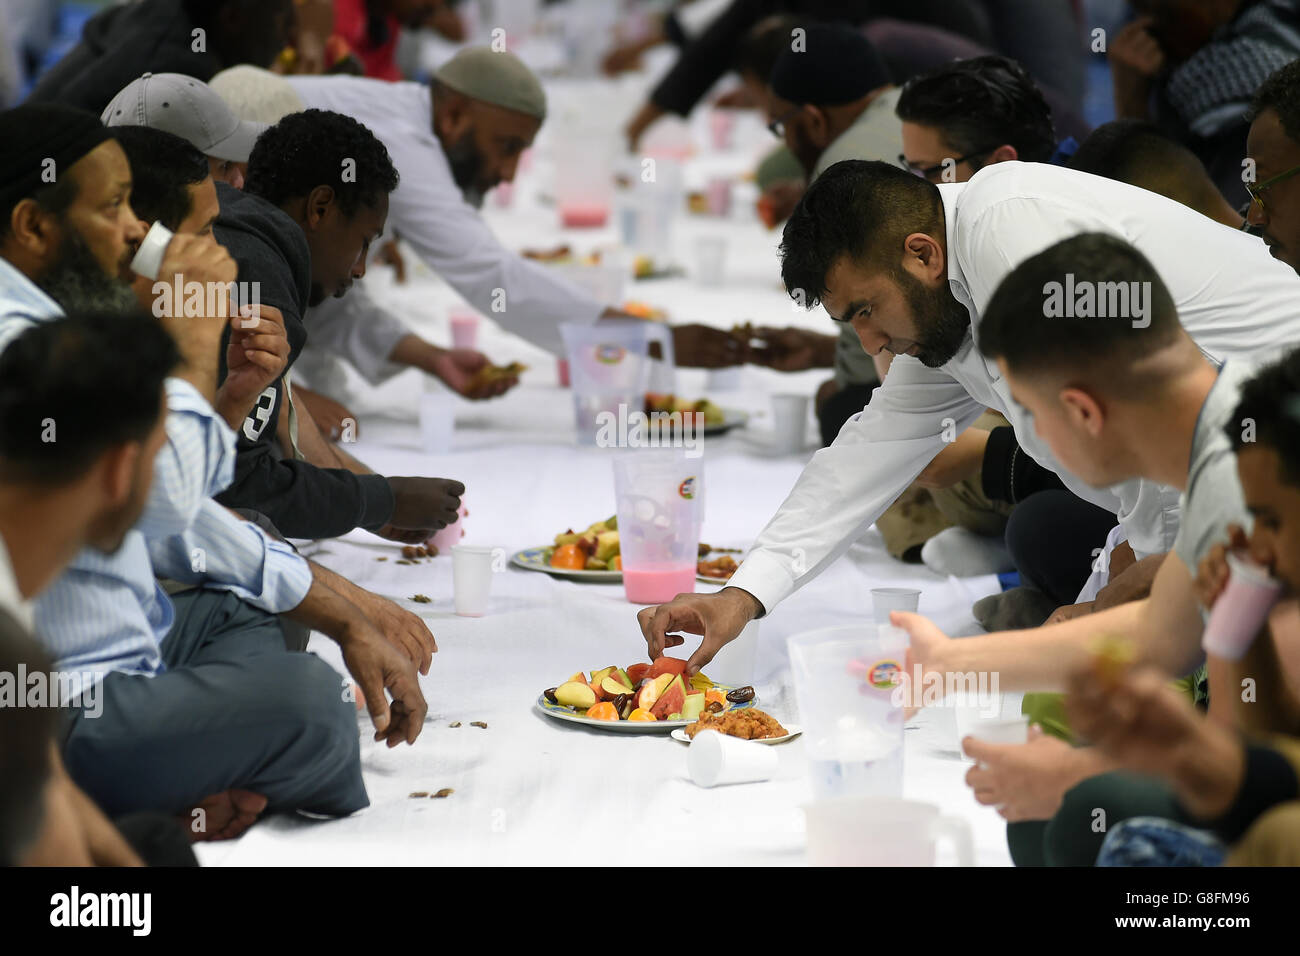 Muslim men break their fast after sunset during the holy month of Ramadan at Birmingham Central Mosque Stock Photo